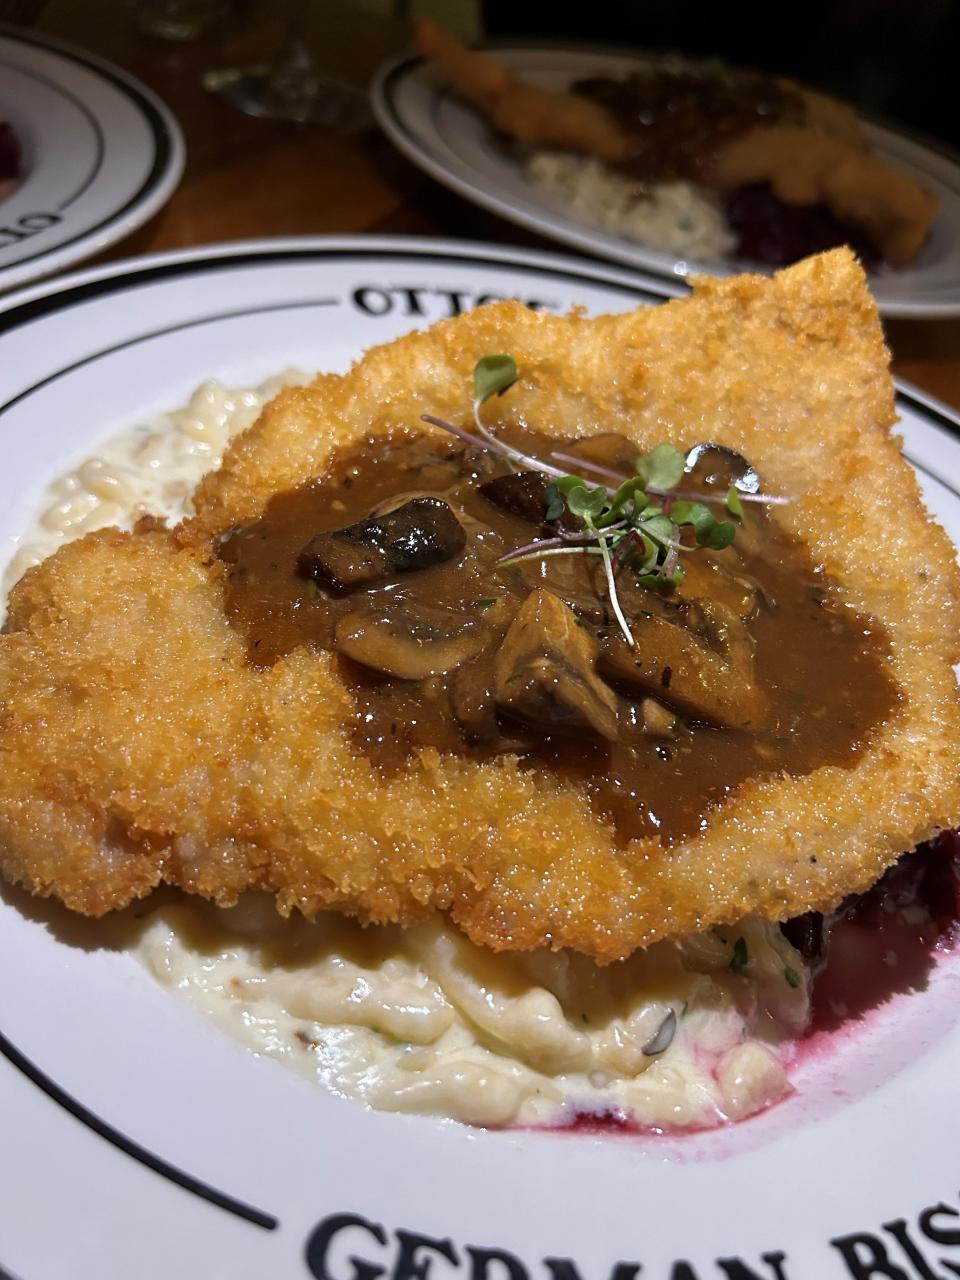 The Jäger Schnitzel at Otto's German Bistro in Fredericksburg, Texas, is the stuff of which dreams are made.